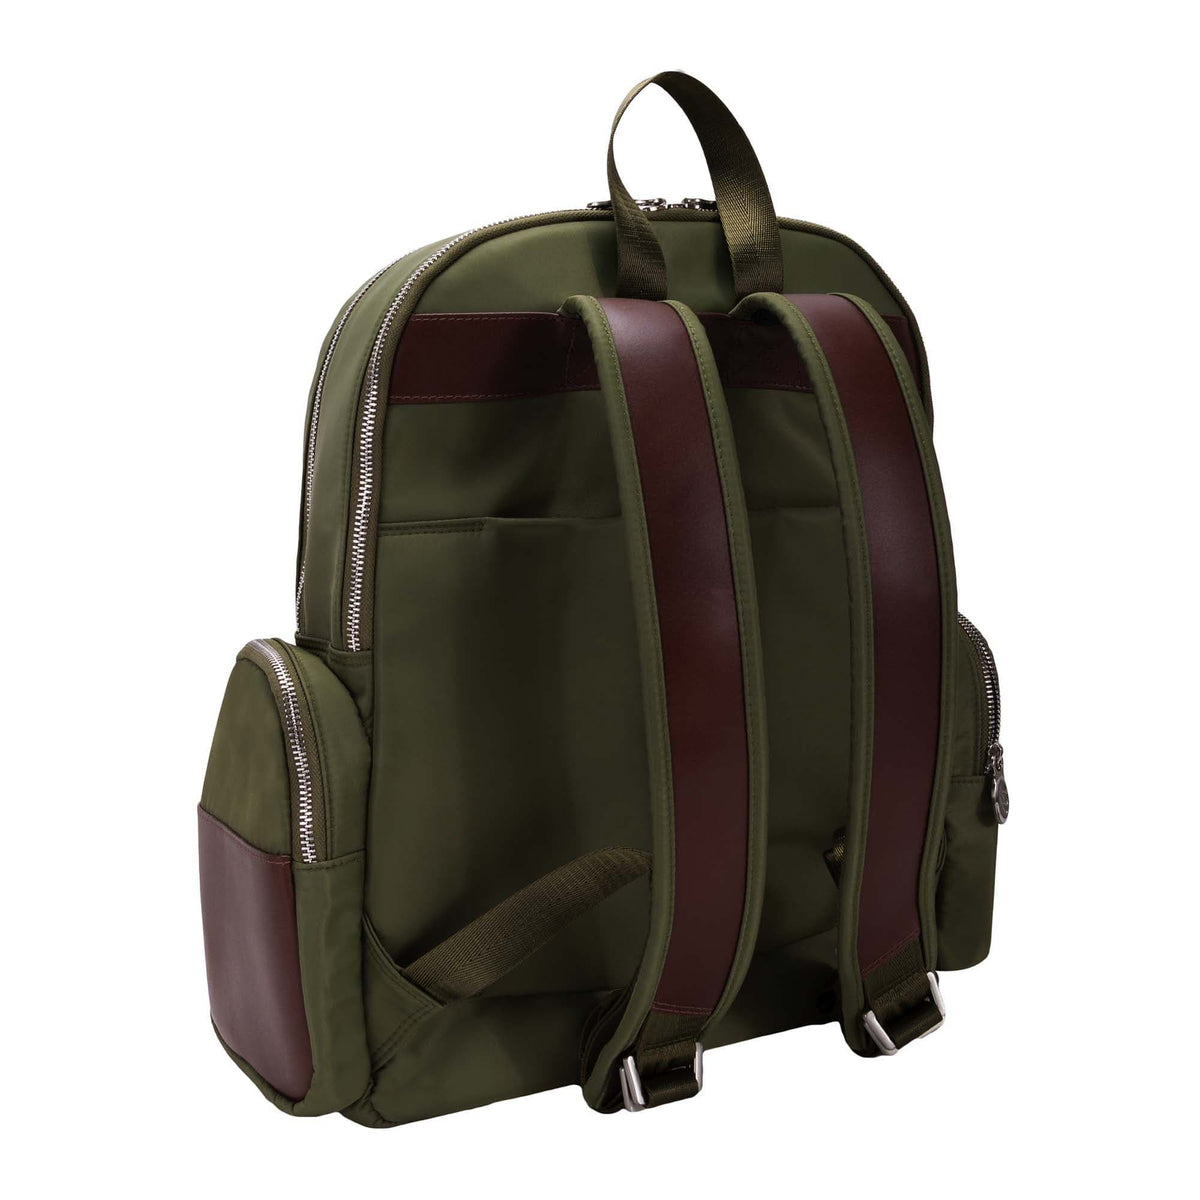 McKlein USA Cumberland 17" Nylon Dual Compartment Laptop Backpack